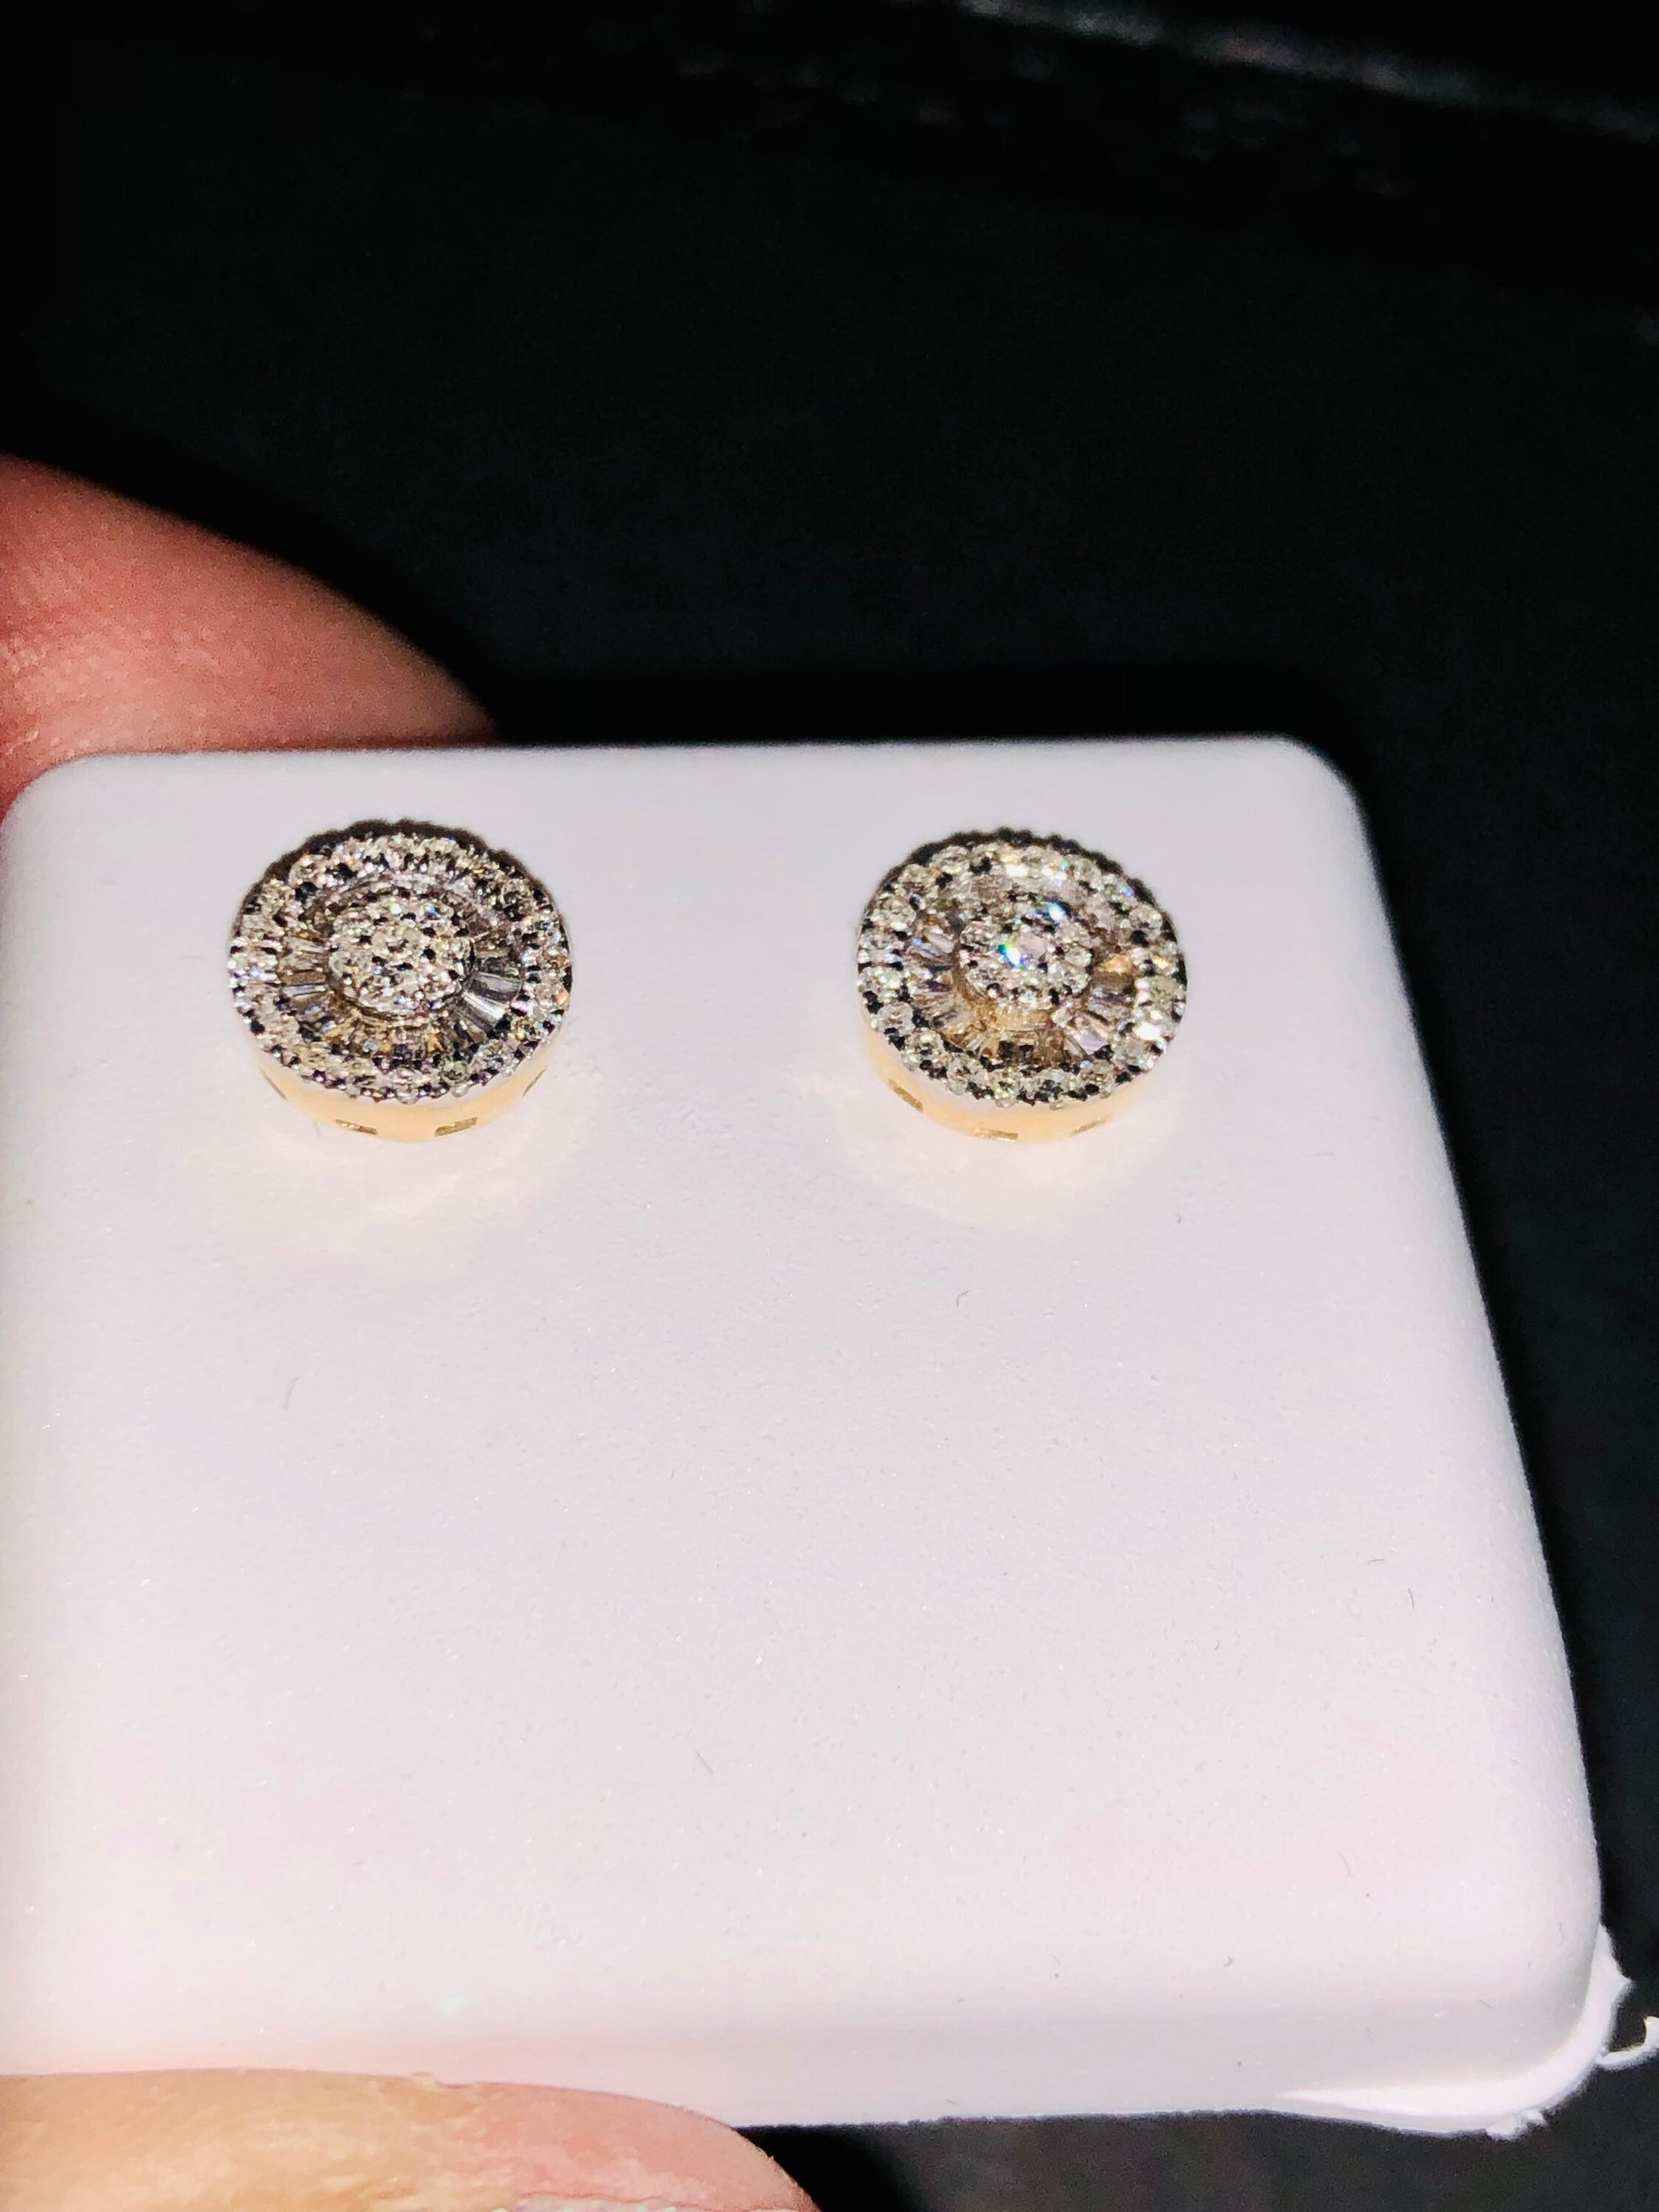 10k solid gold real diamond baguette earrings not plated not CZ comes w free appraisal and gift packaging best cyber week sale holiday